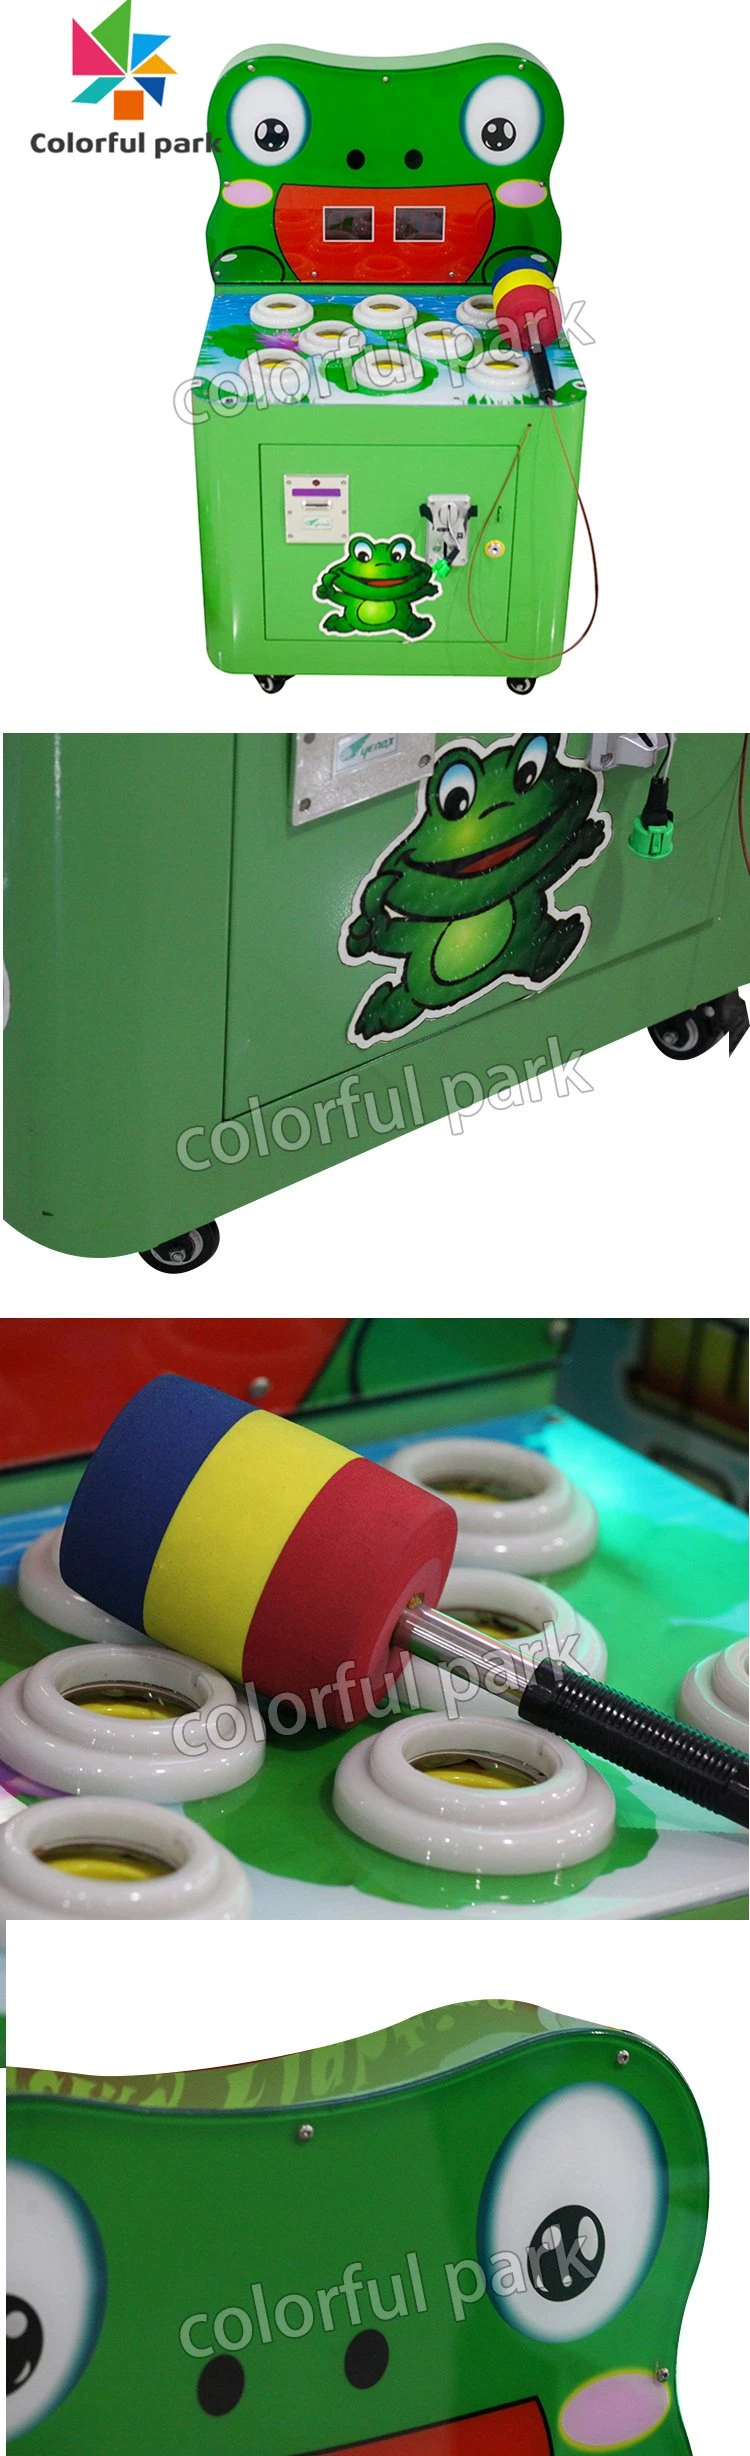 Colorful Park Mini Kids Hit Frog Small Coin Operated Whack a Mole Video Game Machine